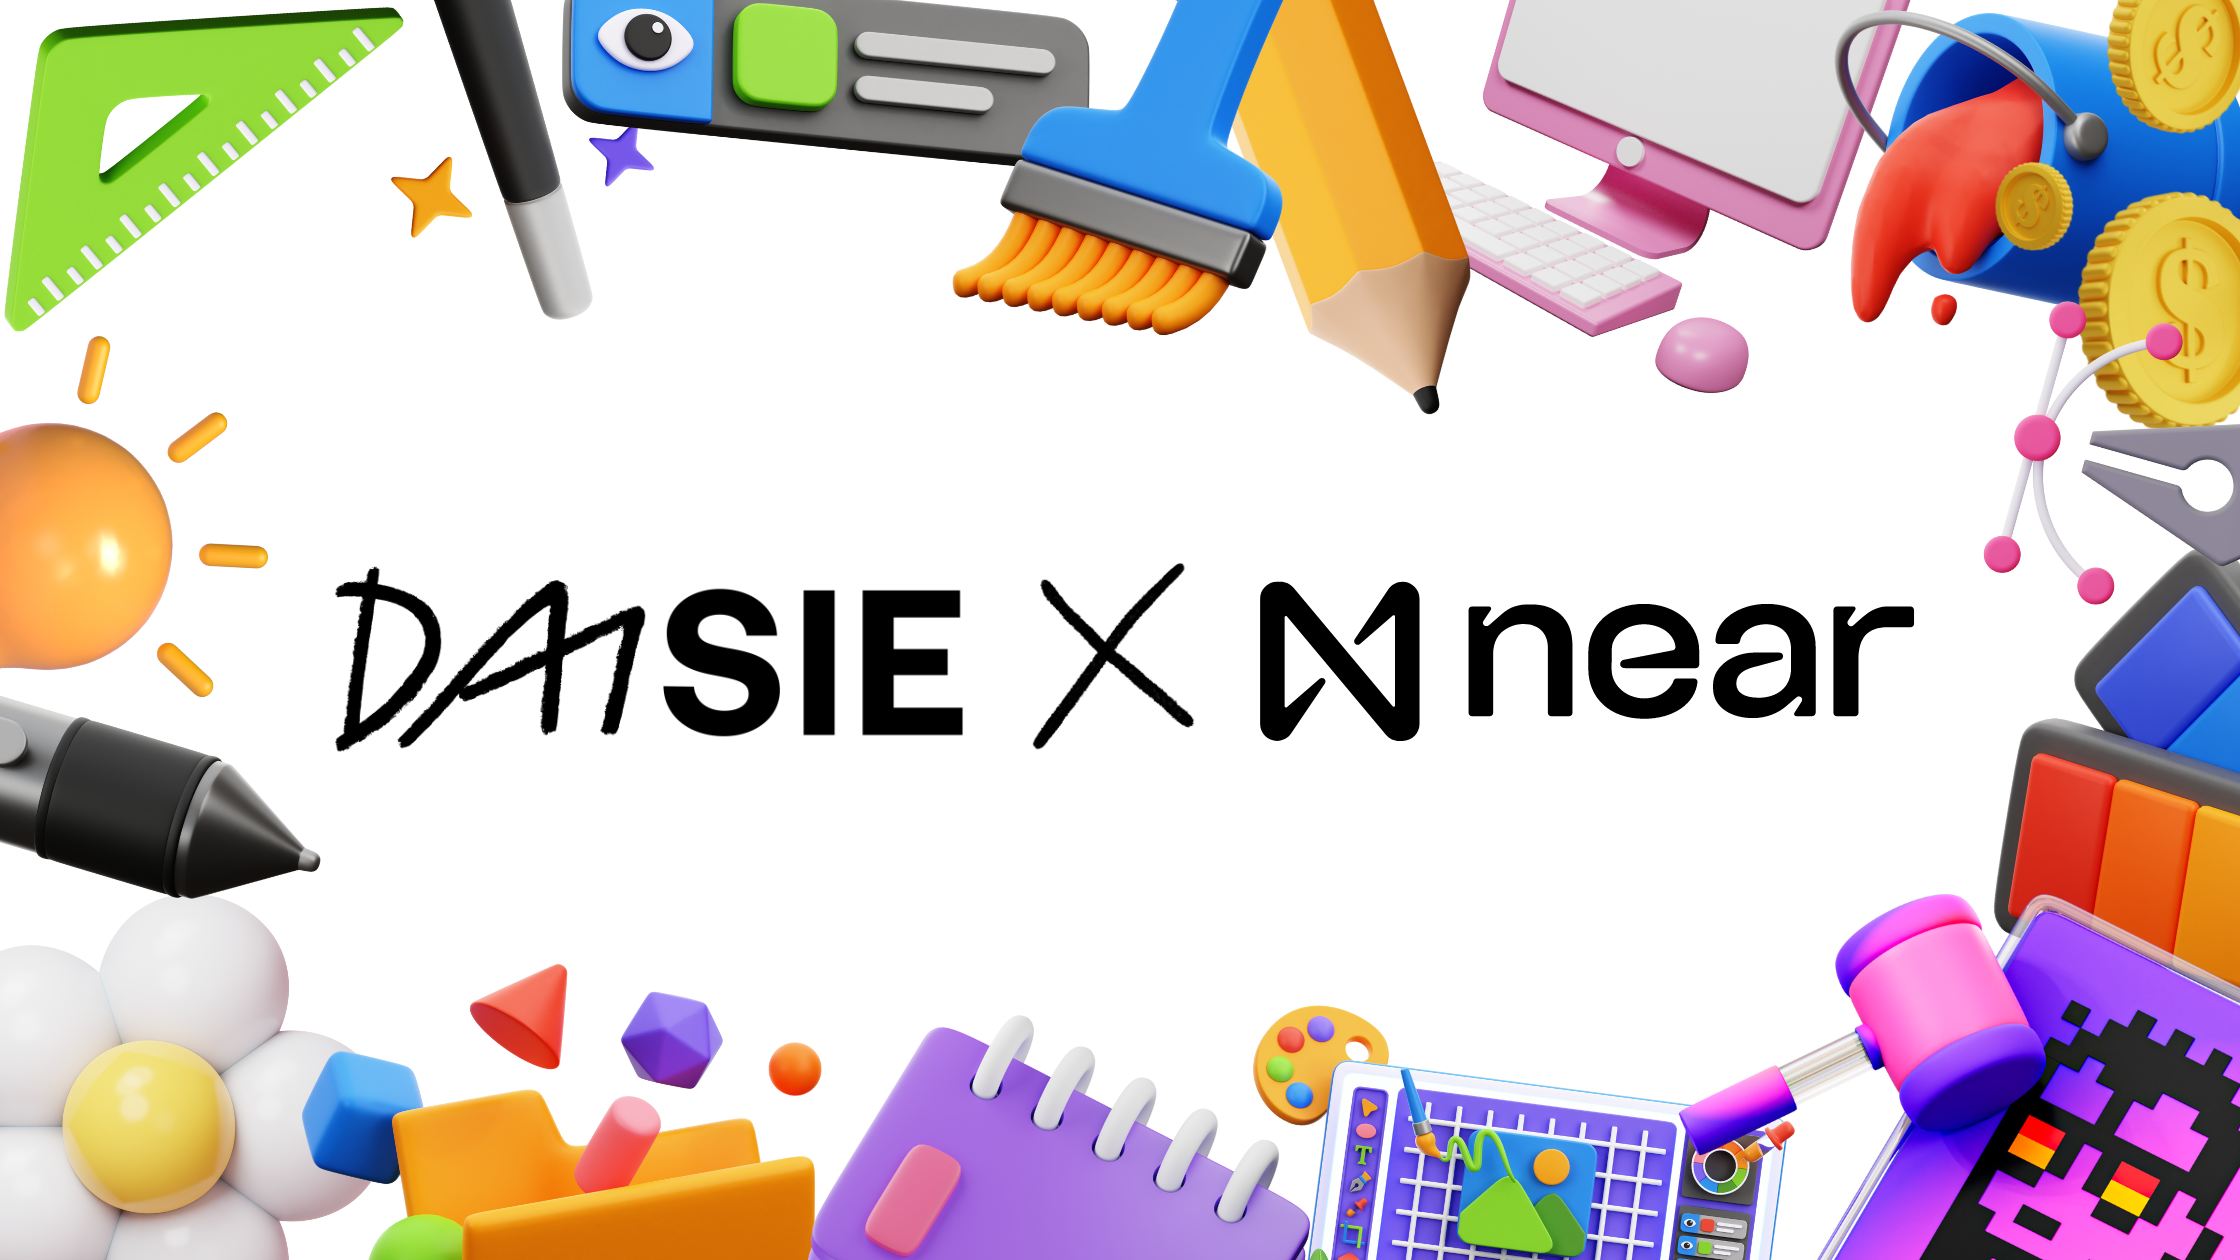 Daisie and NEAR Foundation Empowering Creators in Web3